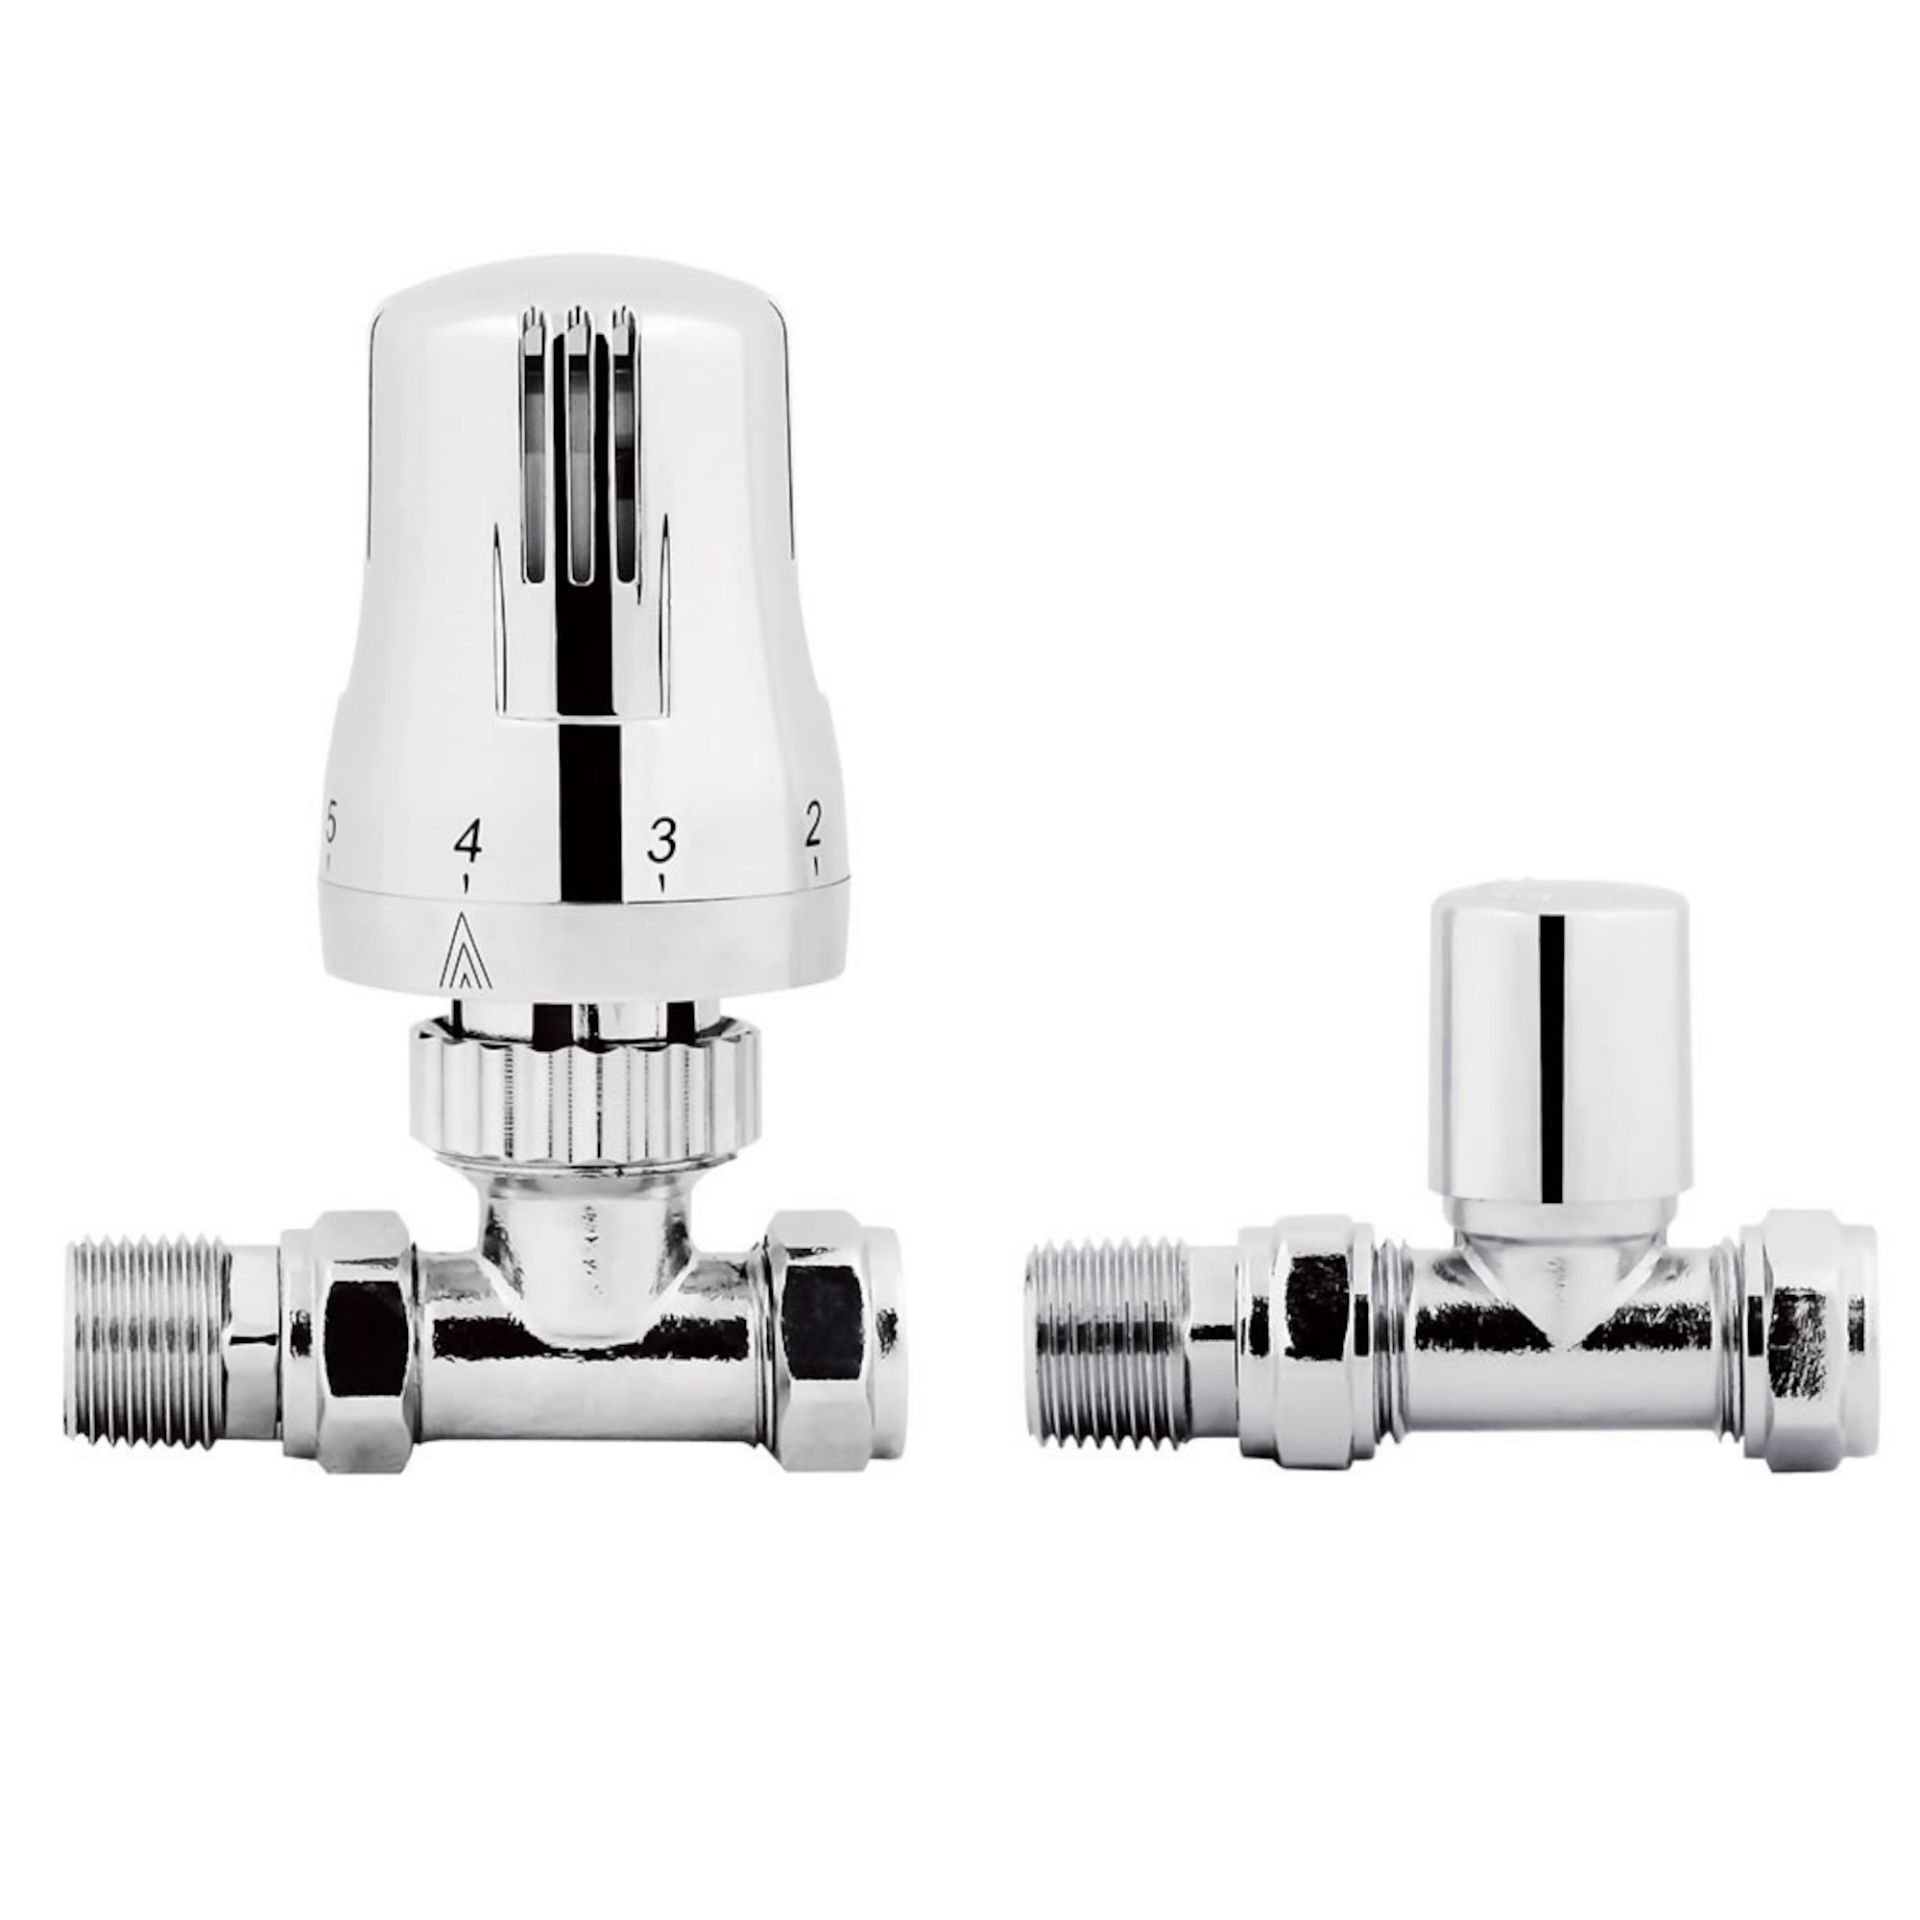 (PT223) 15mm Standard Connection Thermostatic Straight Chrome Radiator Valves Chrome Plated Solid